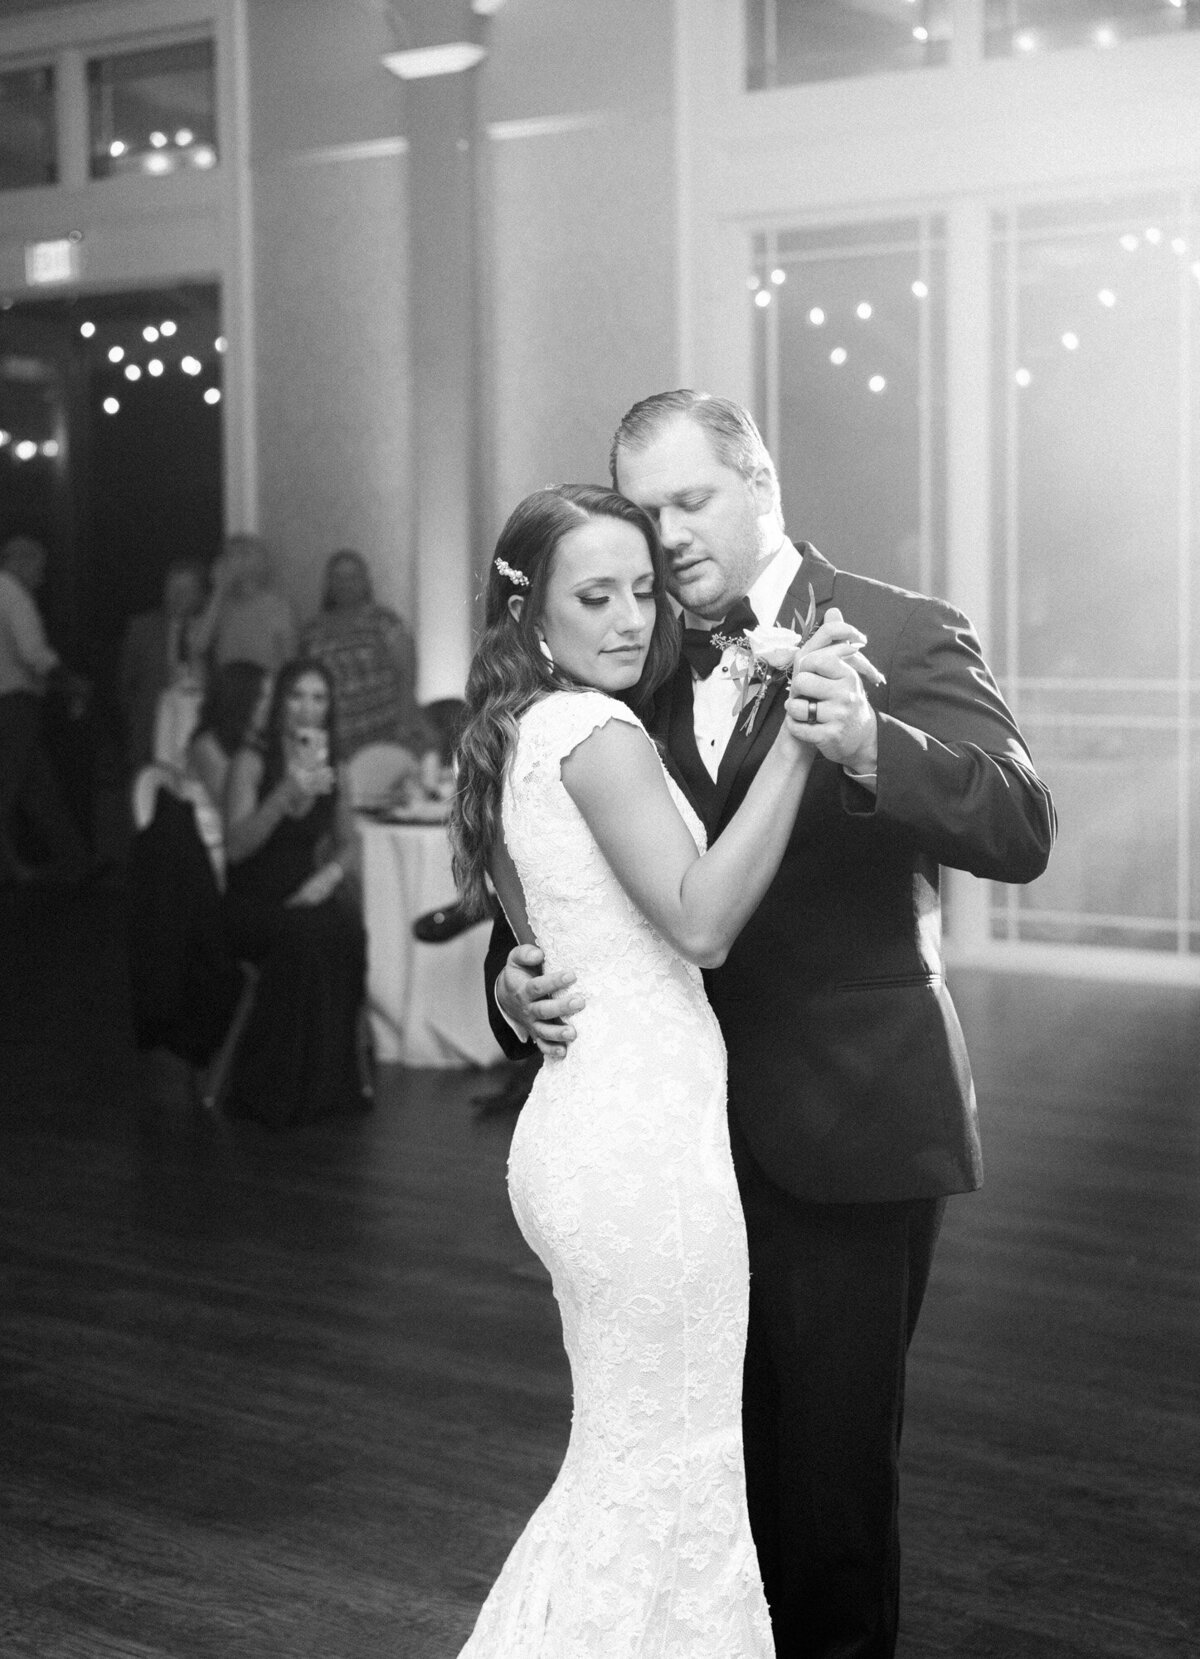 A bride and groom share an intimate first dance in black and white by Birmingham wedding photographer, Kelsey Dawn Photography